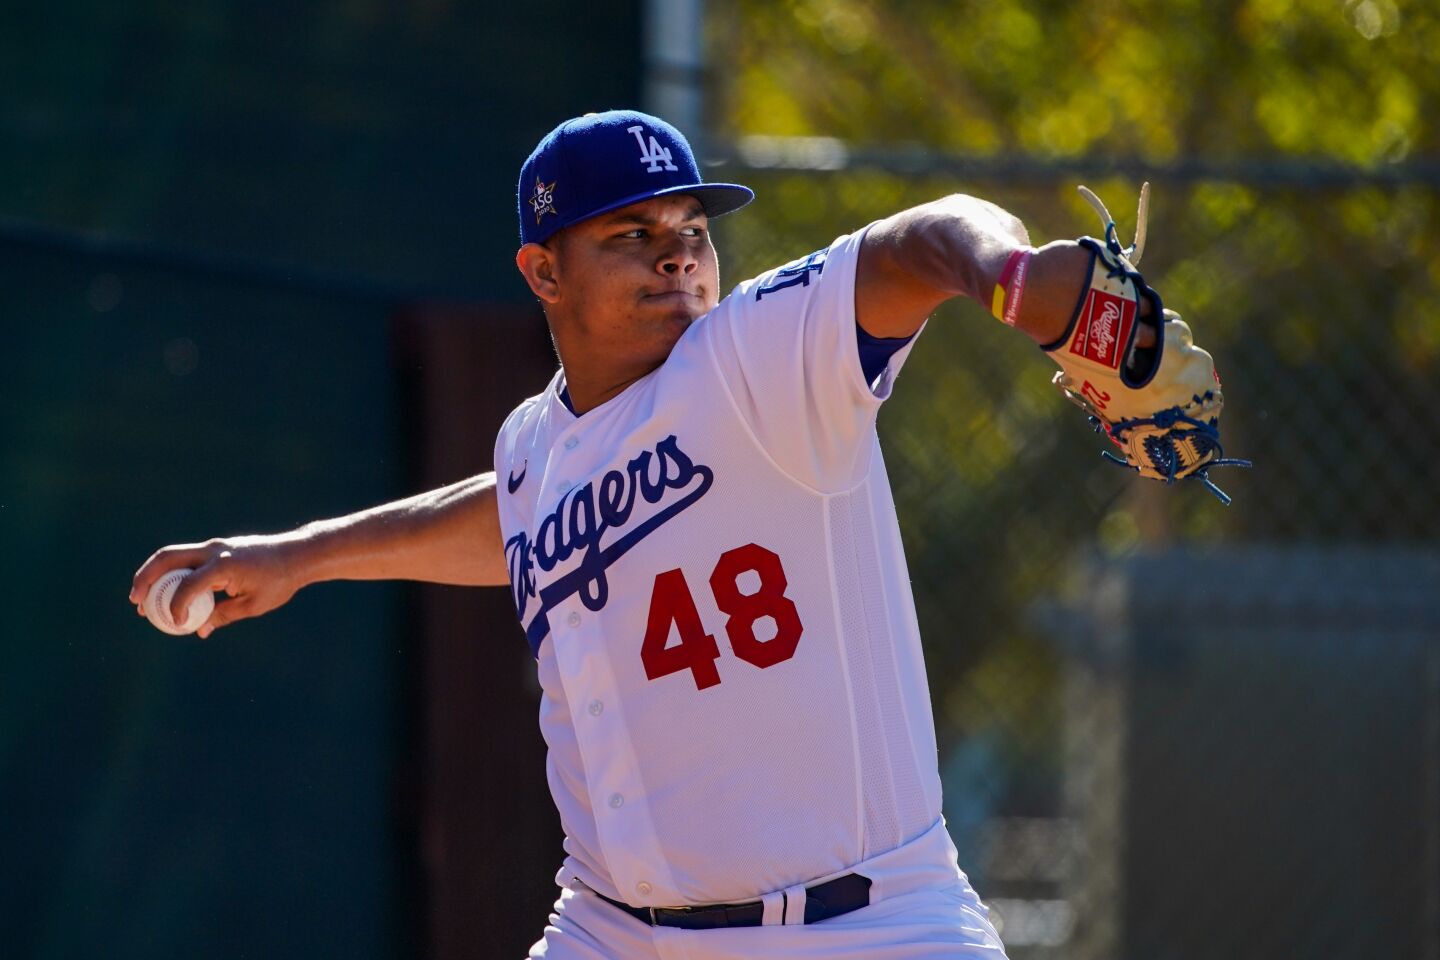 Dodgers reliever Brusdar Graterol pitches during a spring training workout at Camelback Ranch.